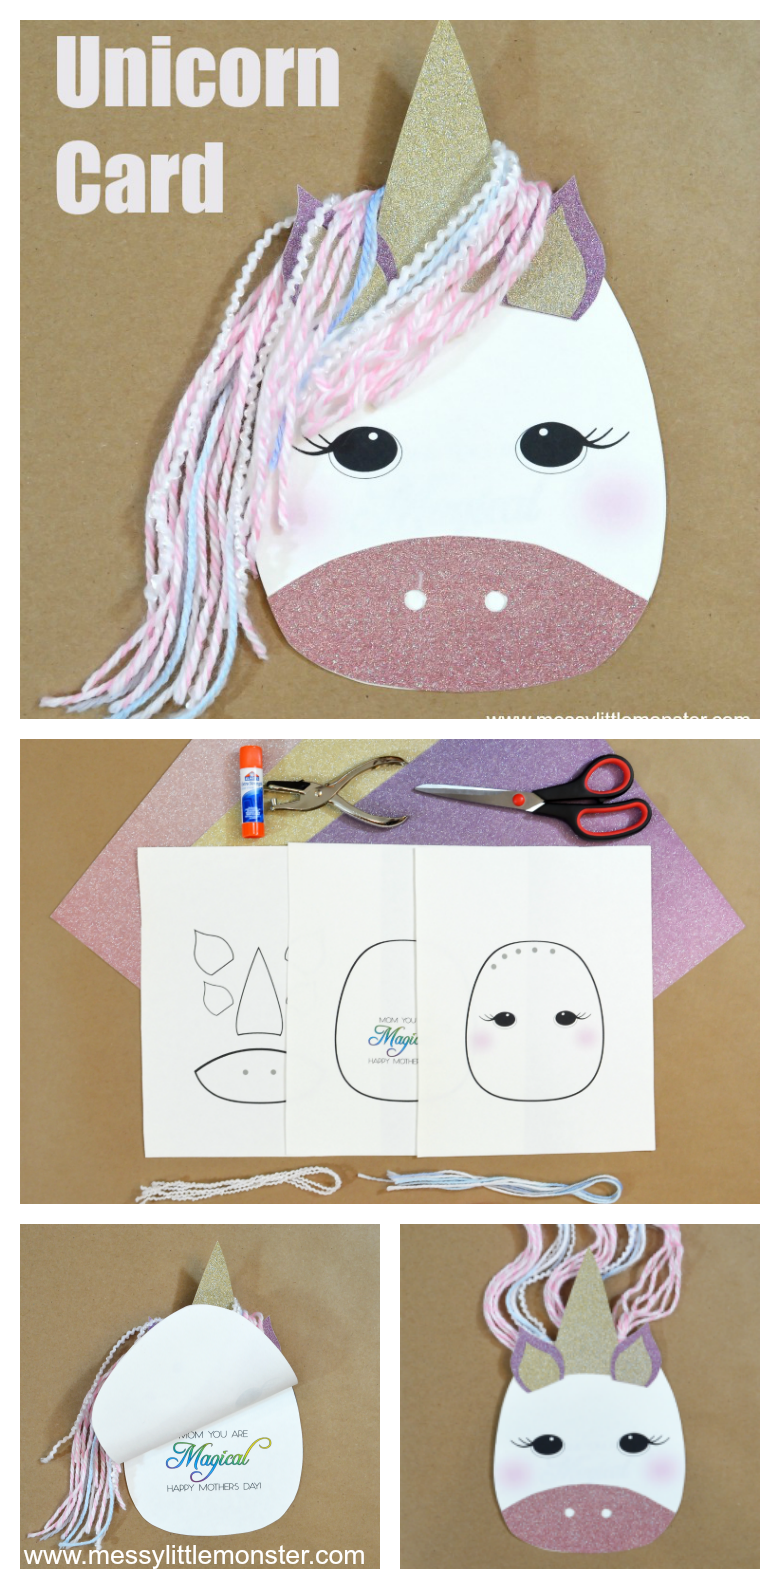 Childrens Unicorn Card Making Crafts Make your own Gift Present Stocking Filler 